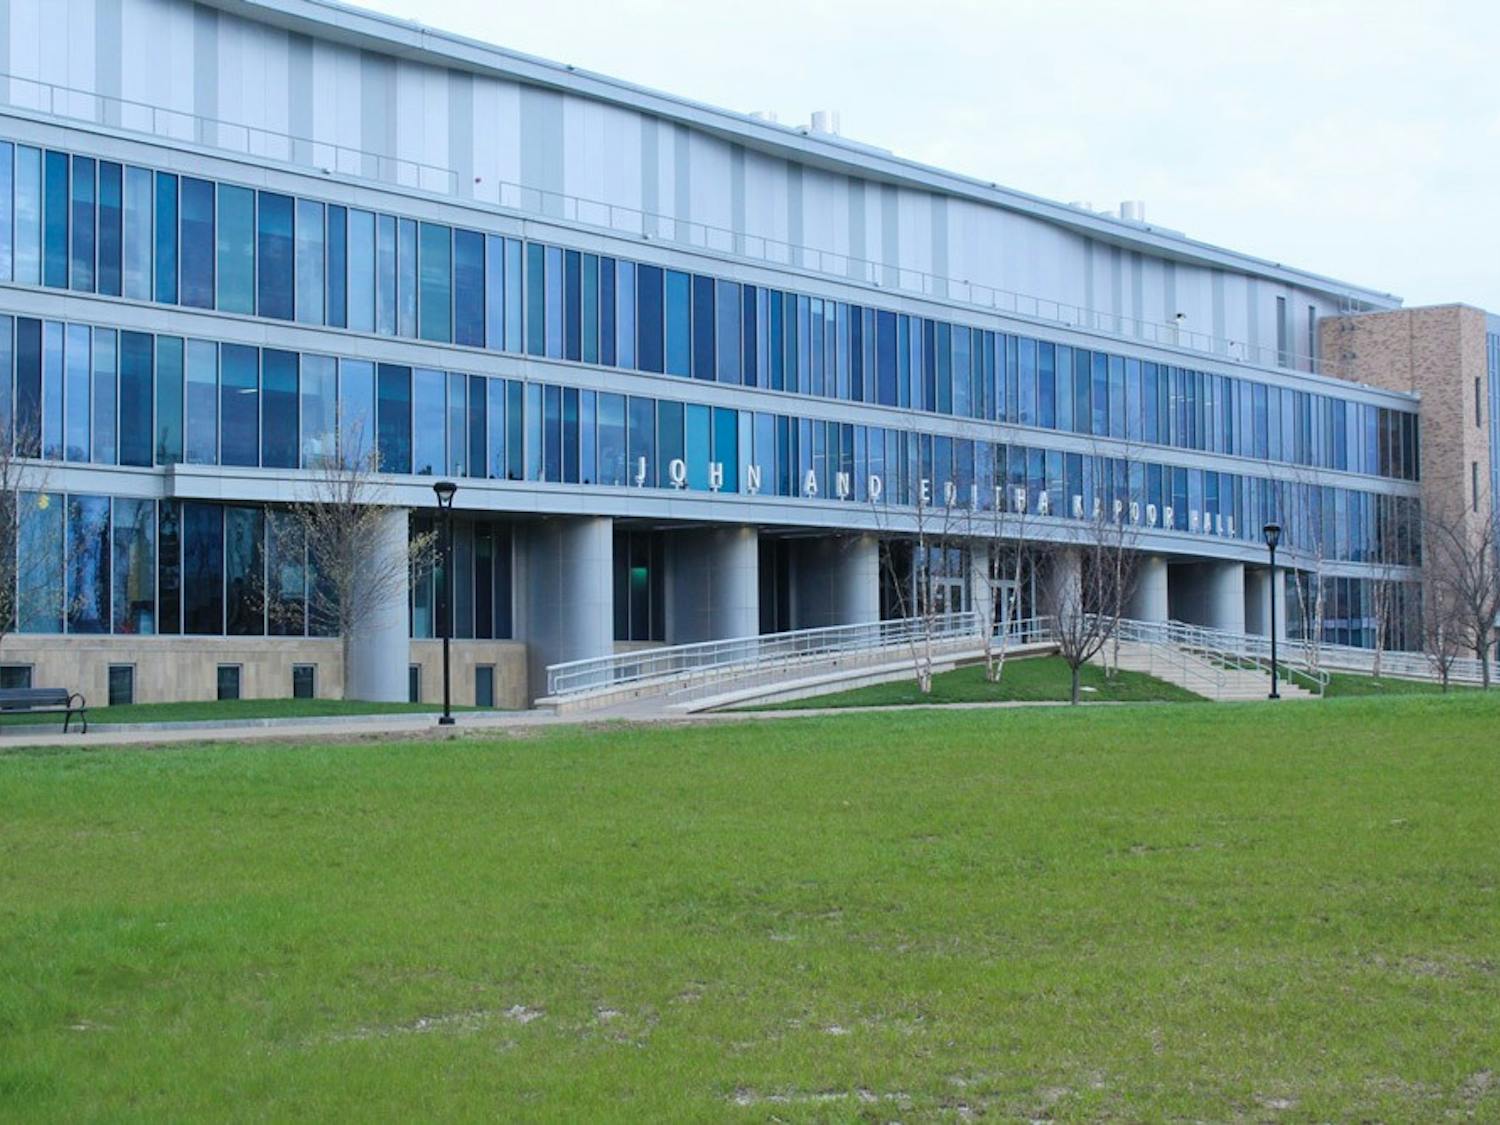 The School of Pharmacy and Pharmaceutical Sciences is currently housed in John and Editha Kapoor Hall. Kapoor earned naming rights to the building after years of donations totaling $10.8 million.